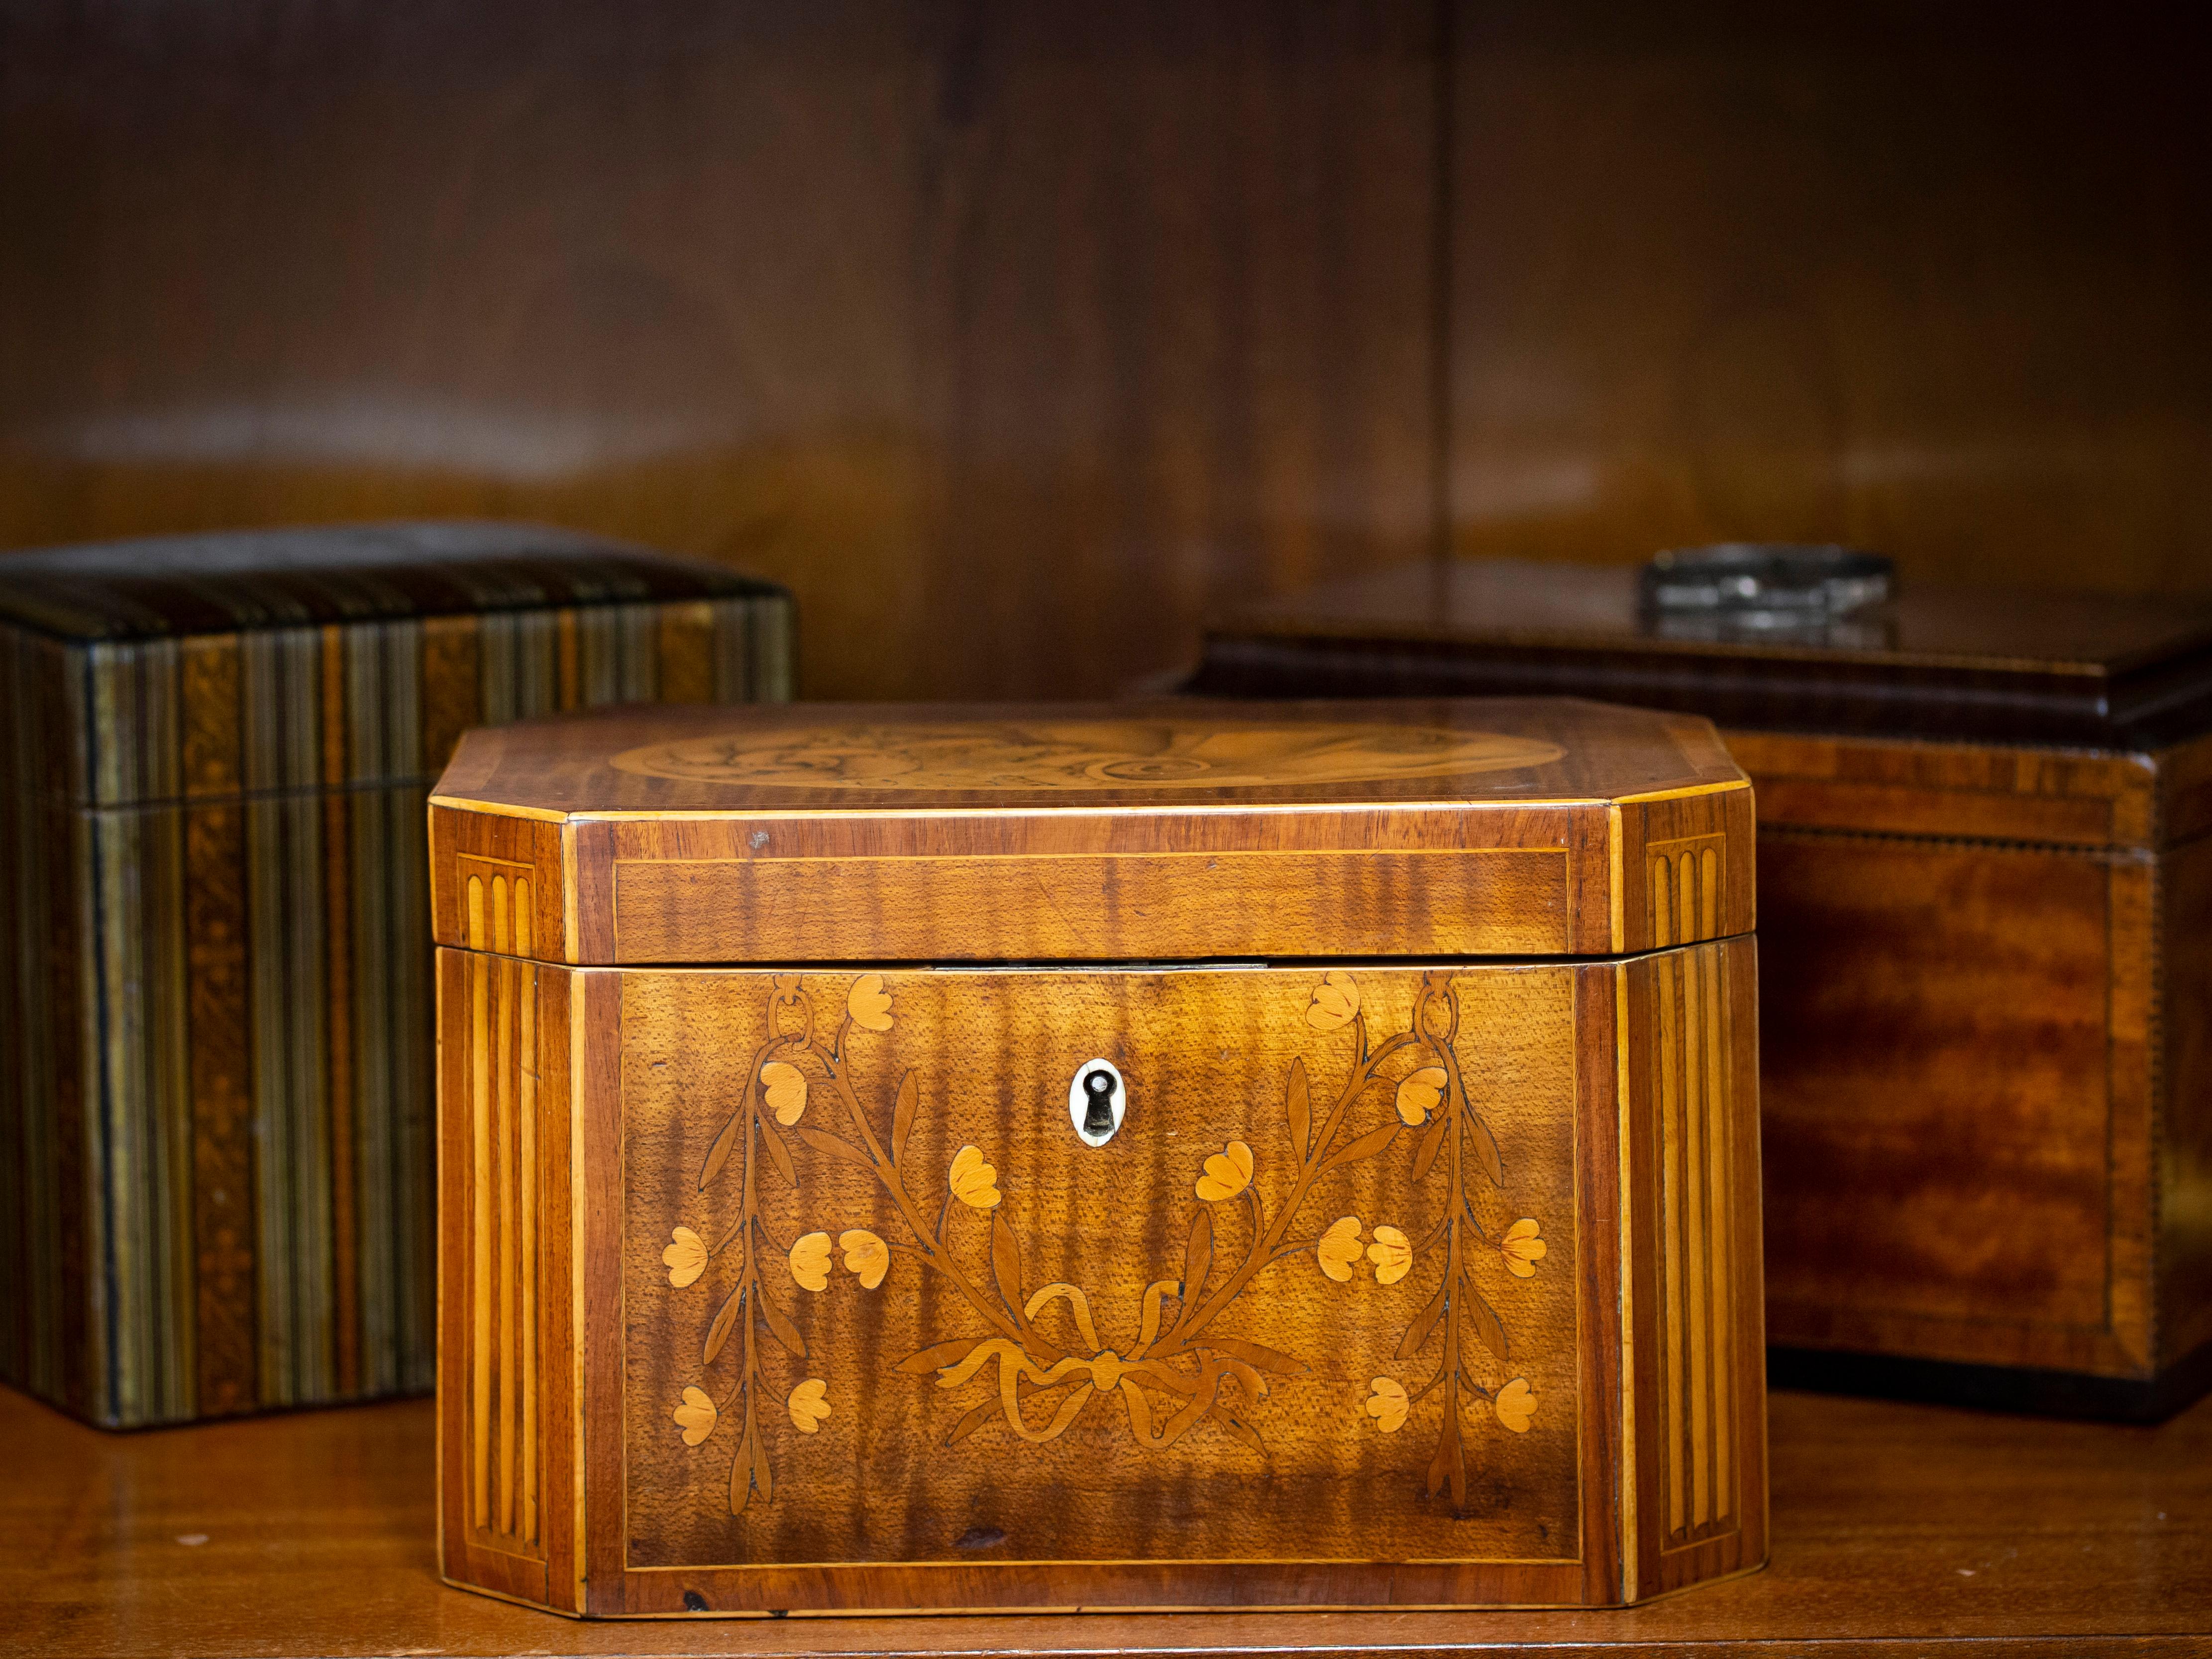 With Two Tea Caddies

From our Tea Caddy collection, we are pleased to offer this Georgian Harewood Tea Chest. The Tea Chest of rectangular form veneered in Harewood with inlaid Boxwood fluted cants, quadrant boxwood edging and Tulipwood crossbanded